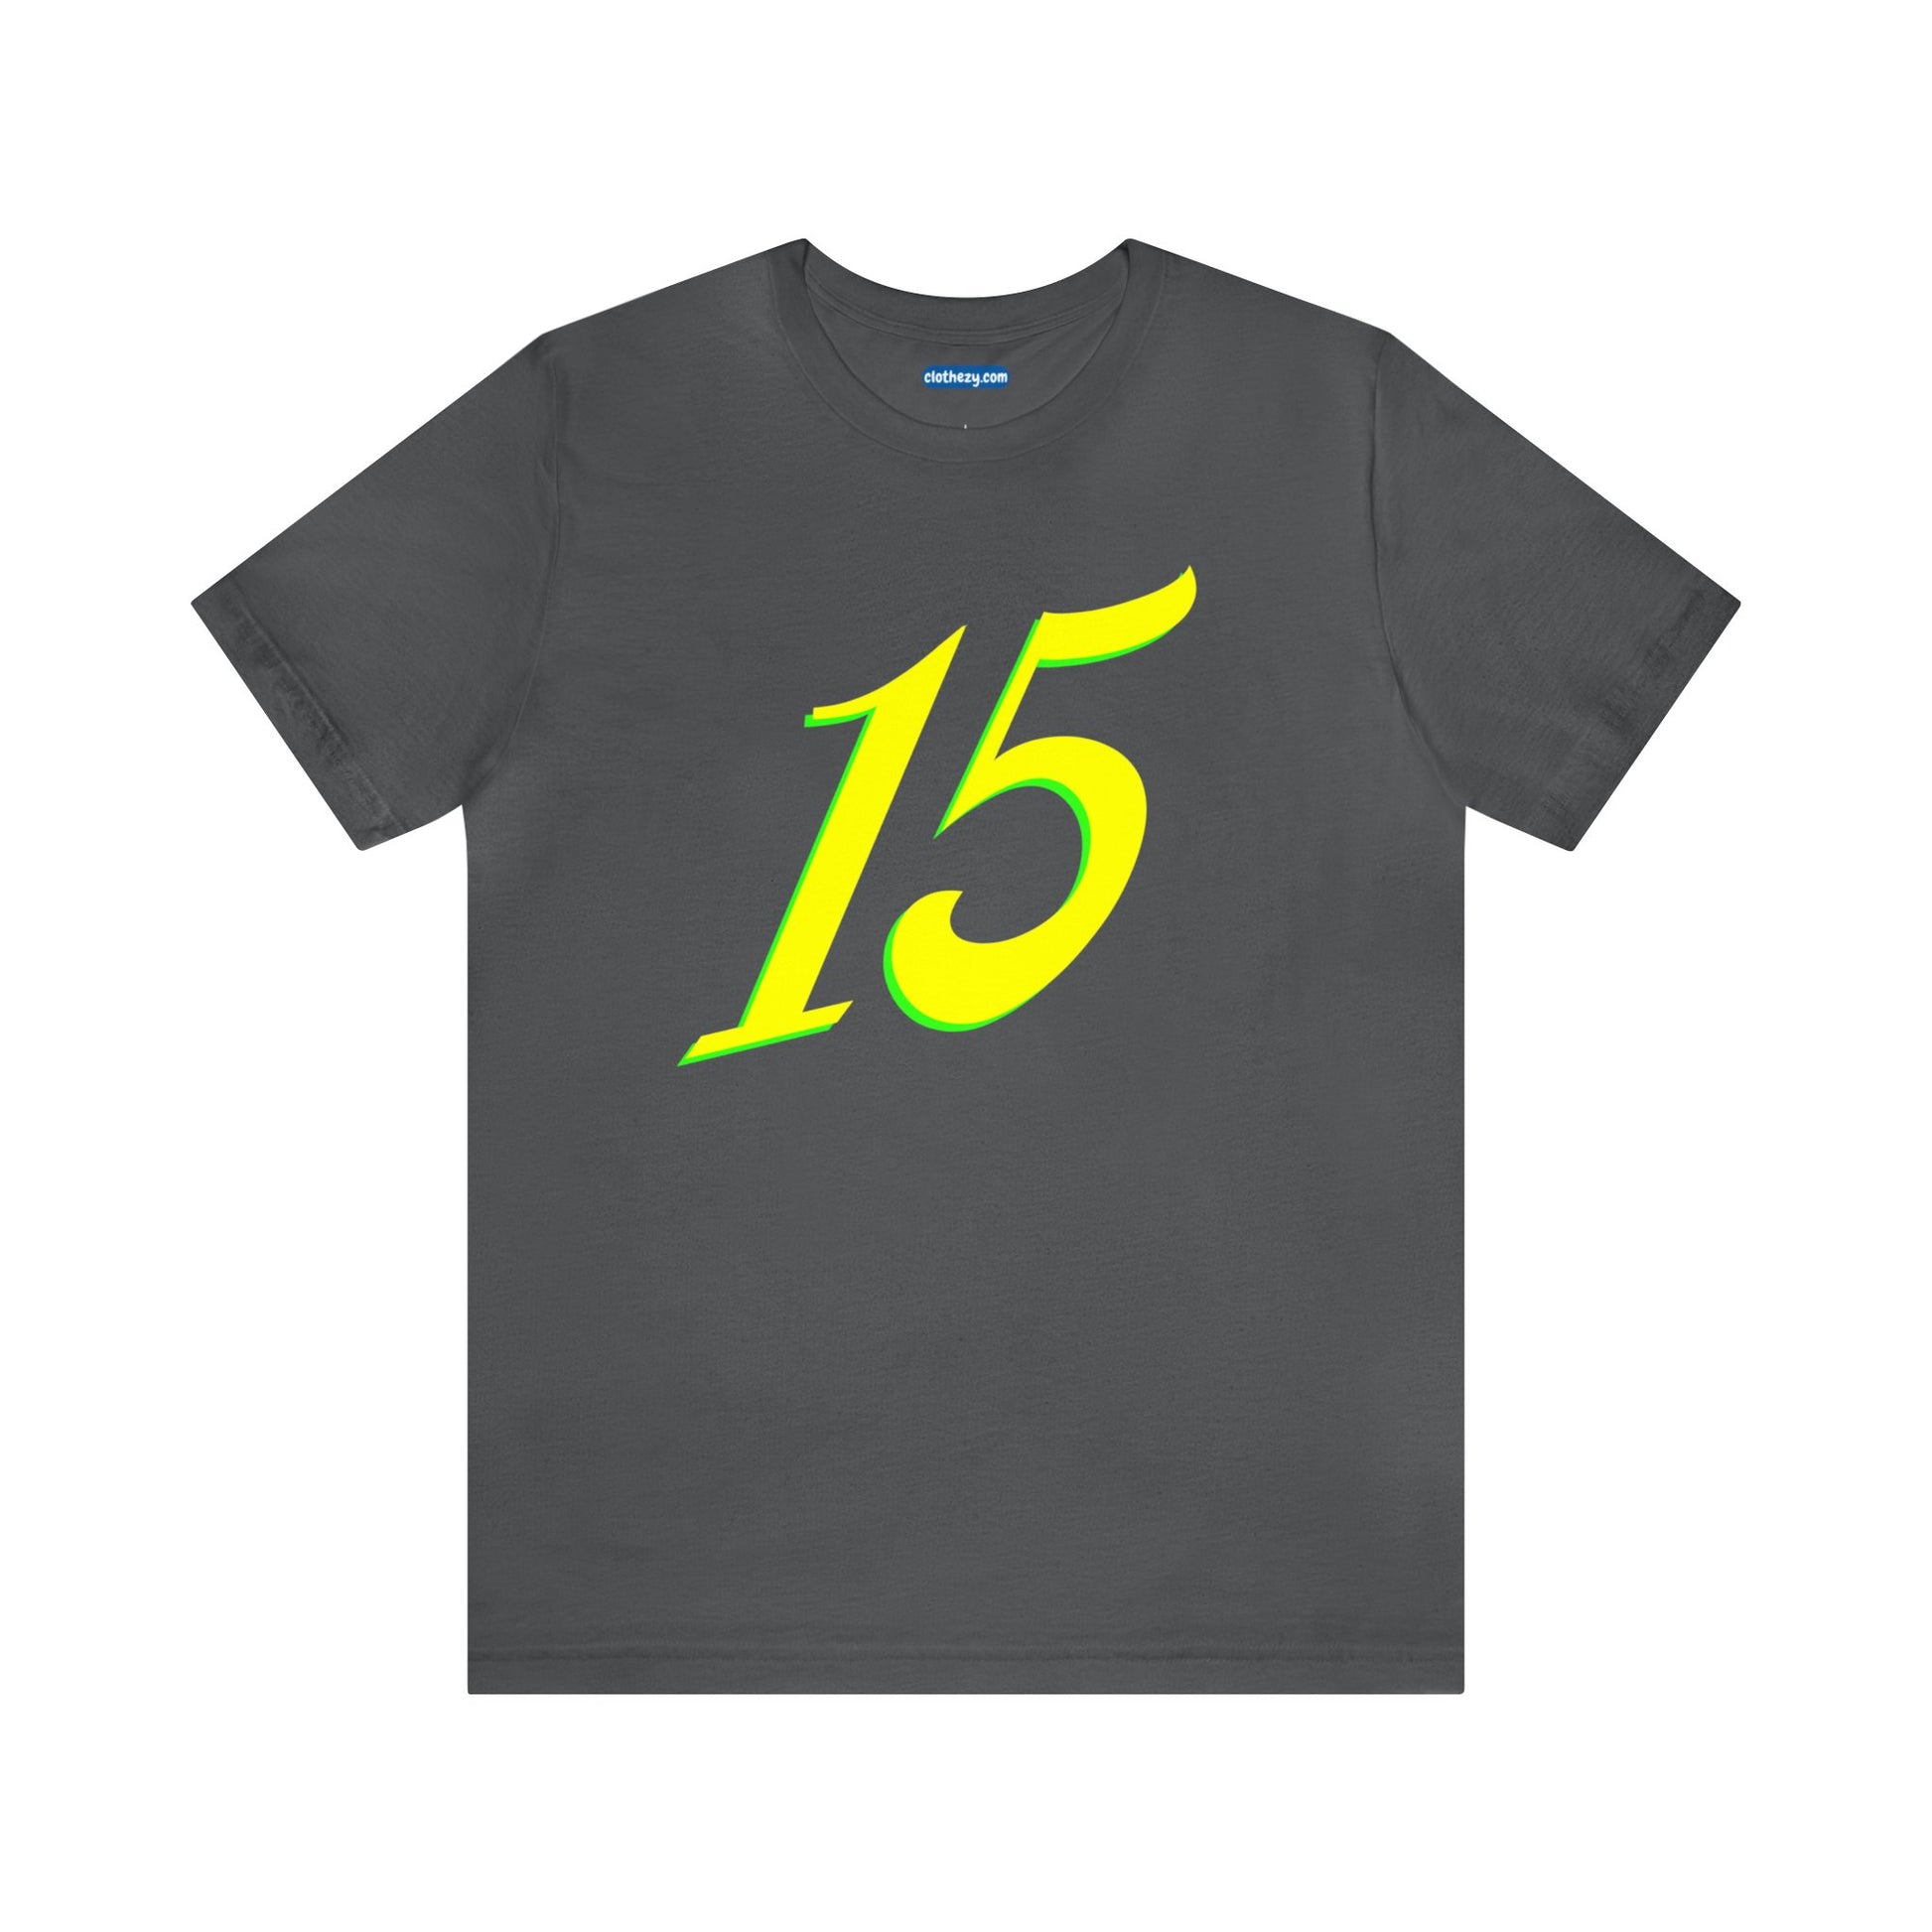 Number 15 Design - Soft Cotton Tee for birthdays and celebrations, Gift for friends and family, Multiple Options by clothezy.com in Black Size Small - Buy Now